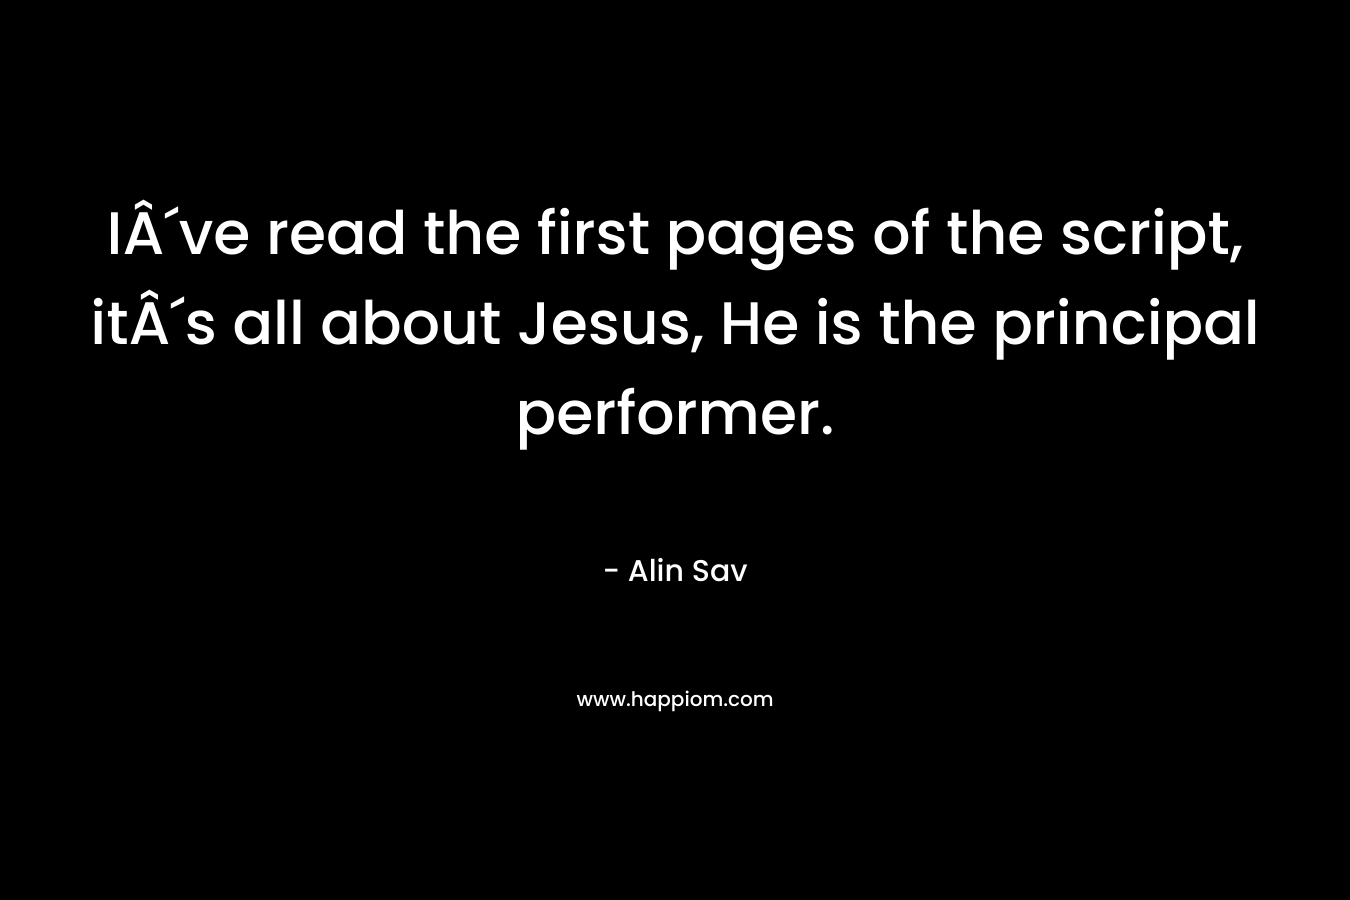 IÂ´ve read the first pages of the script, itÂ´s all about Jesus, He is the principal performer.